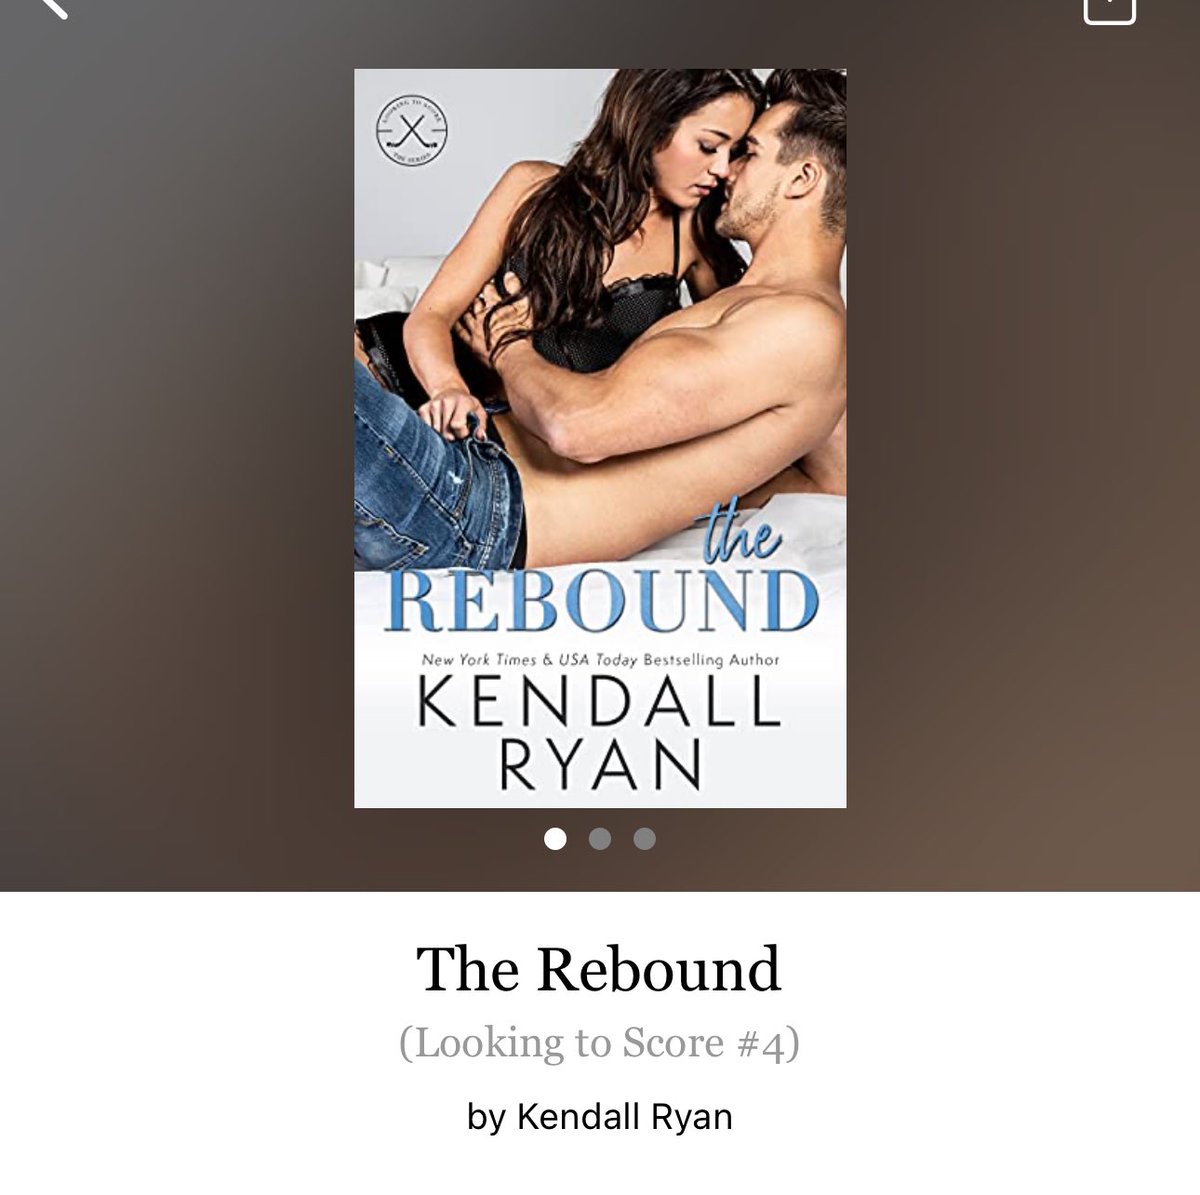 The Rebound by Kendall Ryan 

#TheRebound by #KendallRyan #6289 #20chapters #272pages #438of400 #Series #Audiobook #75for19 #LookingToScoreSeries #Book4of4 #7houraudiobook #SaintAndKinley #april2024 #clearingoffreadingshelves #whatsnext #readitquick #hoopla